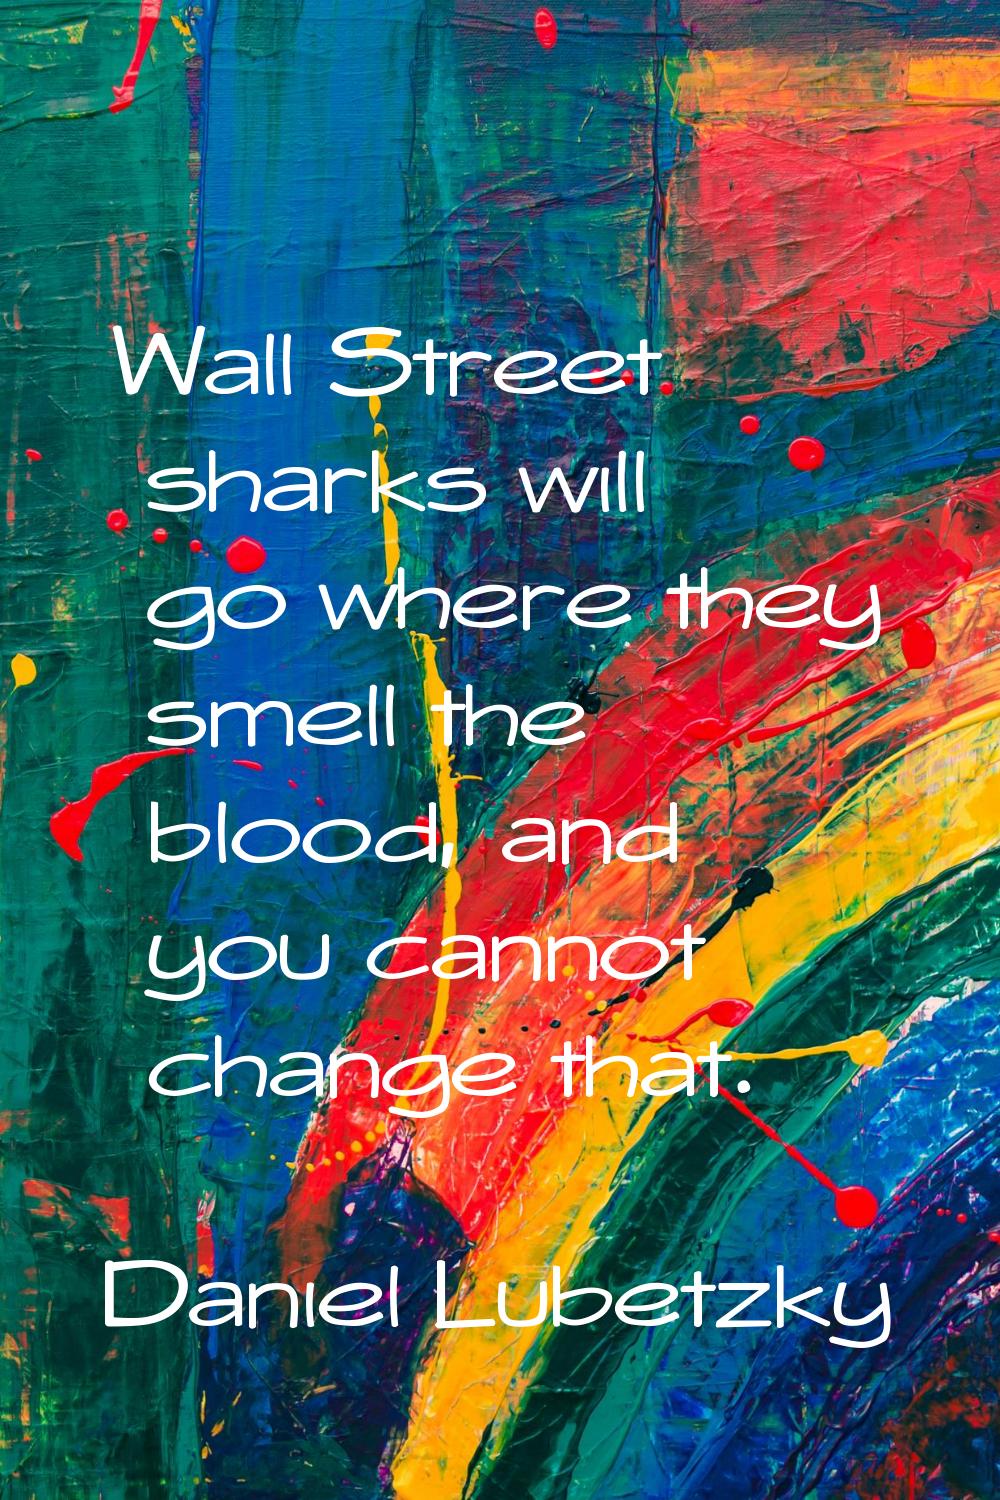 Wall Street sharks will go where they smell the blood, and you cannot change that.